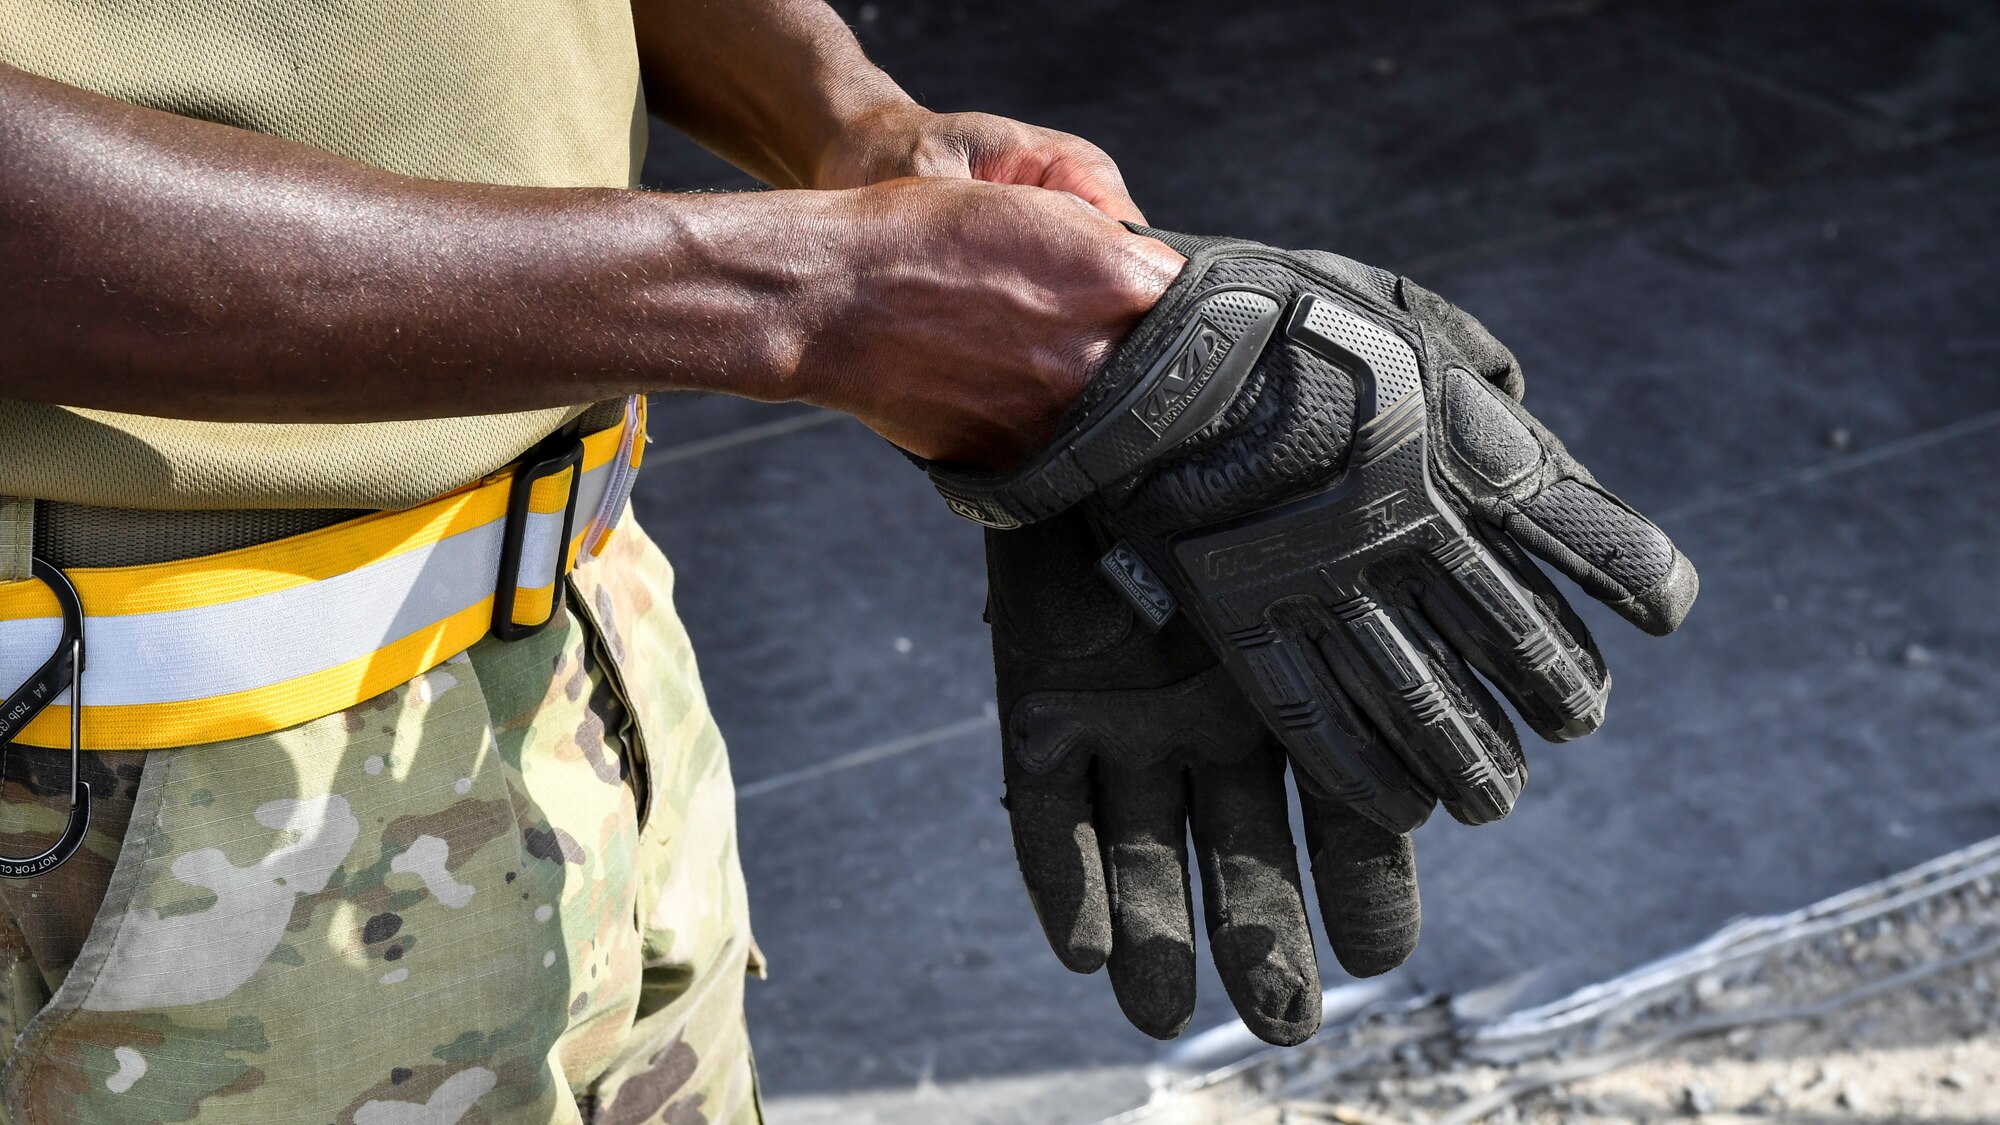 Staff Sgt. Earl Devaughn, 386th Expeditionary Logistics Readiness Squadron aerial port cargo processing representative, puts on work gloves before handling cargo at Ali Al Salem Air Base, Kuwait, Oct. 17, 2019. Port Dawgs use a variety of personal protective equipment to guarantee safety and mission readiness, to include ear and eye protection, gloves, steel toe boots and reflective belts